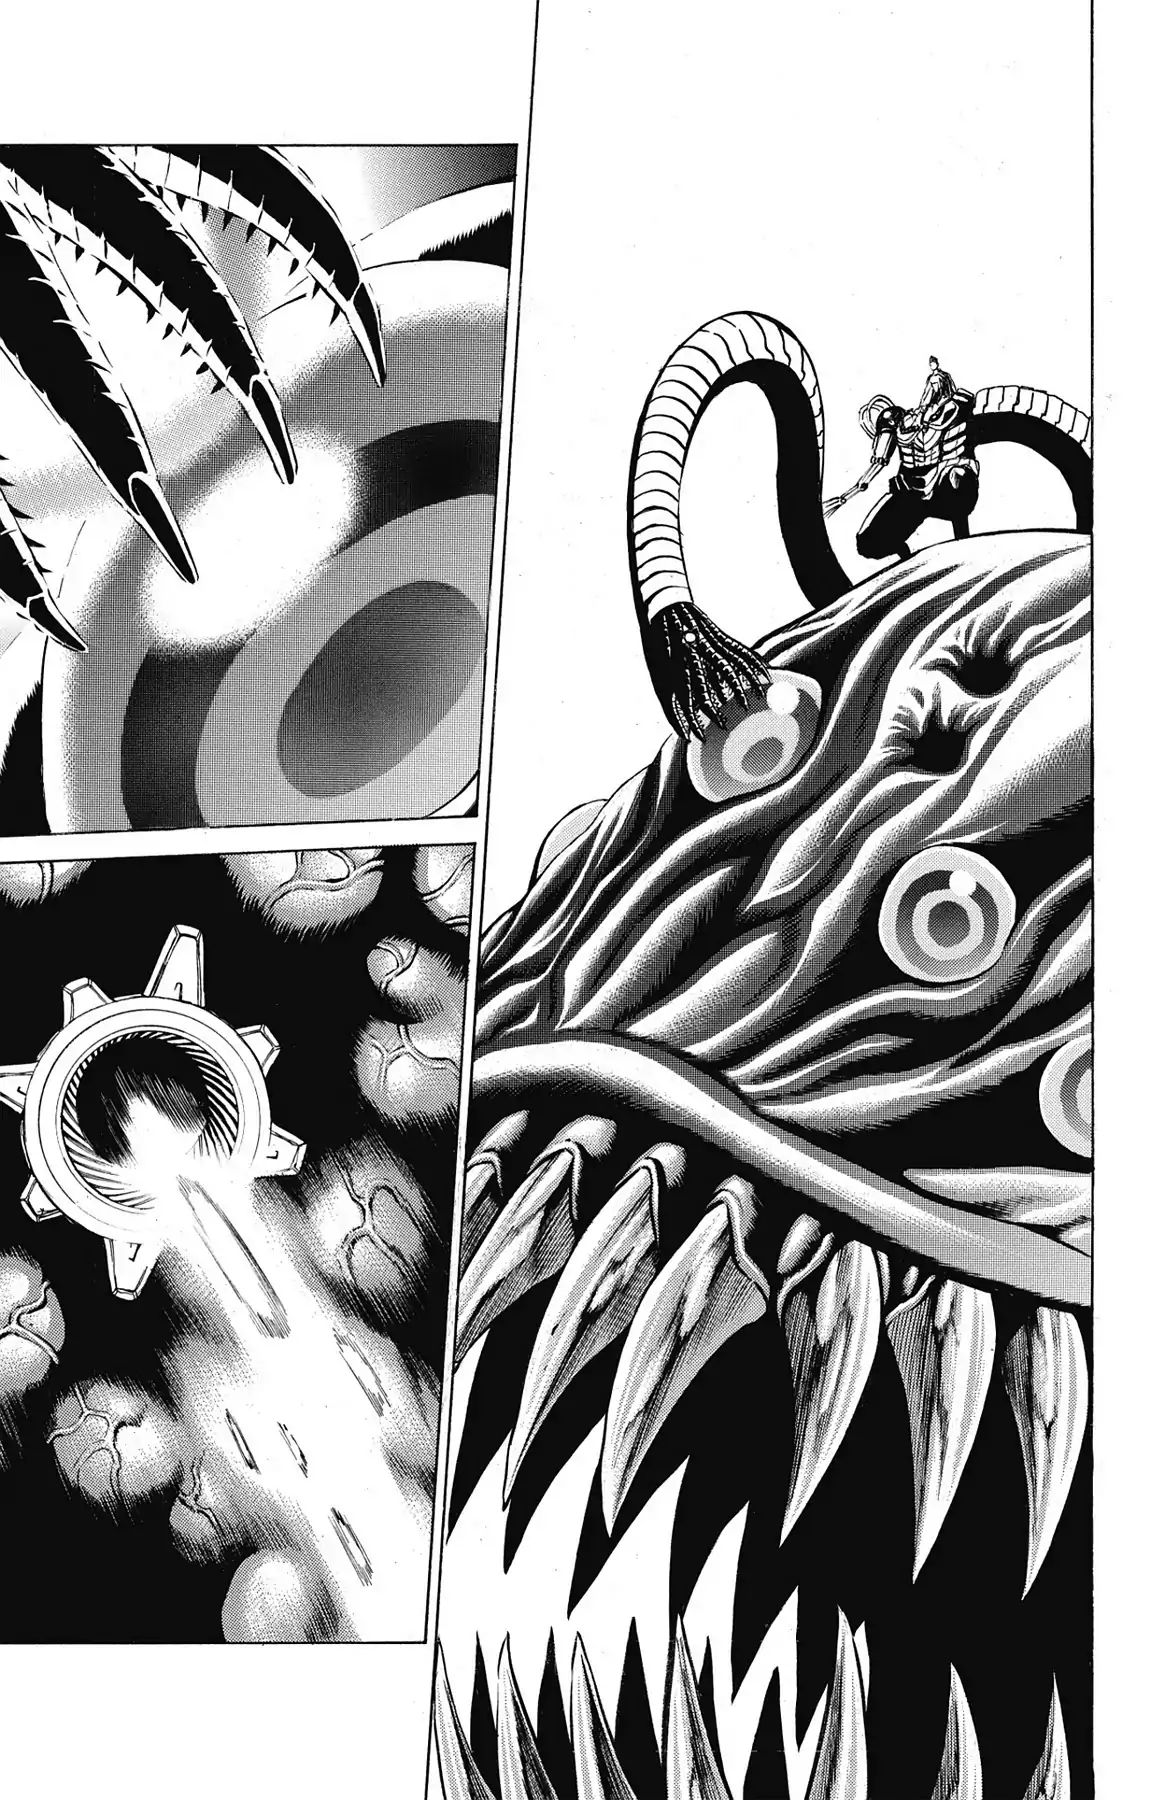 Hakaijuu Vol.12 Chapter 45: As A Soldier